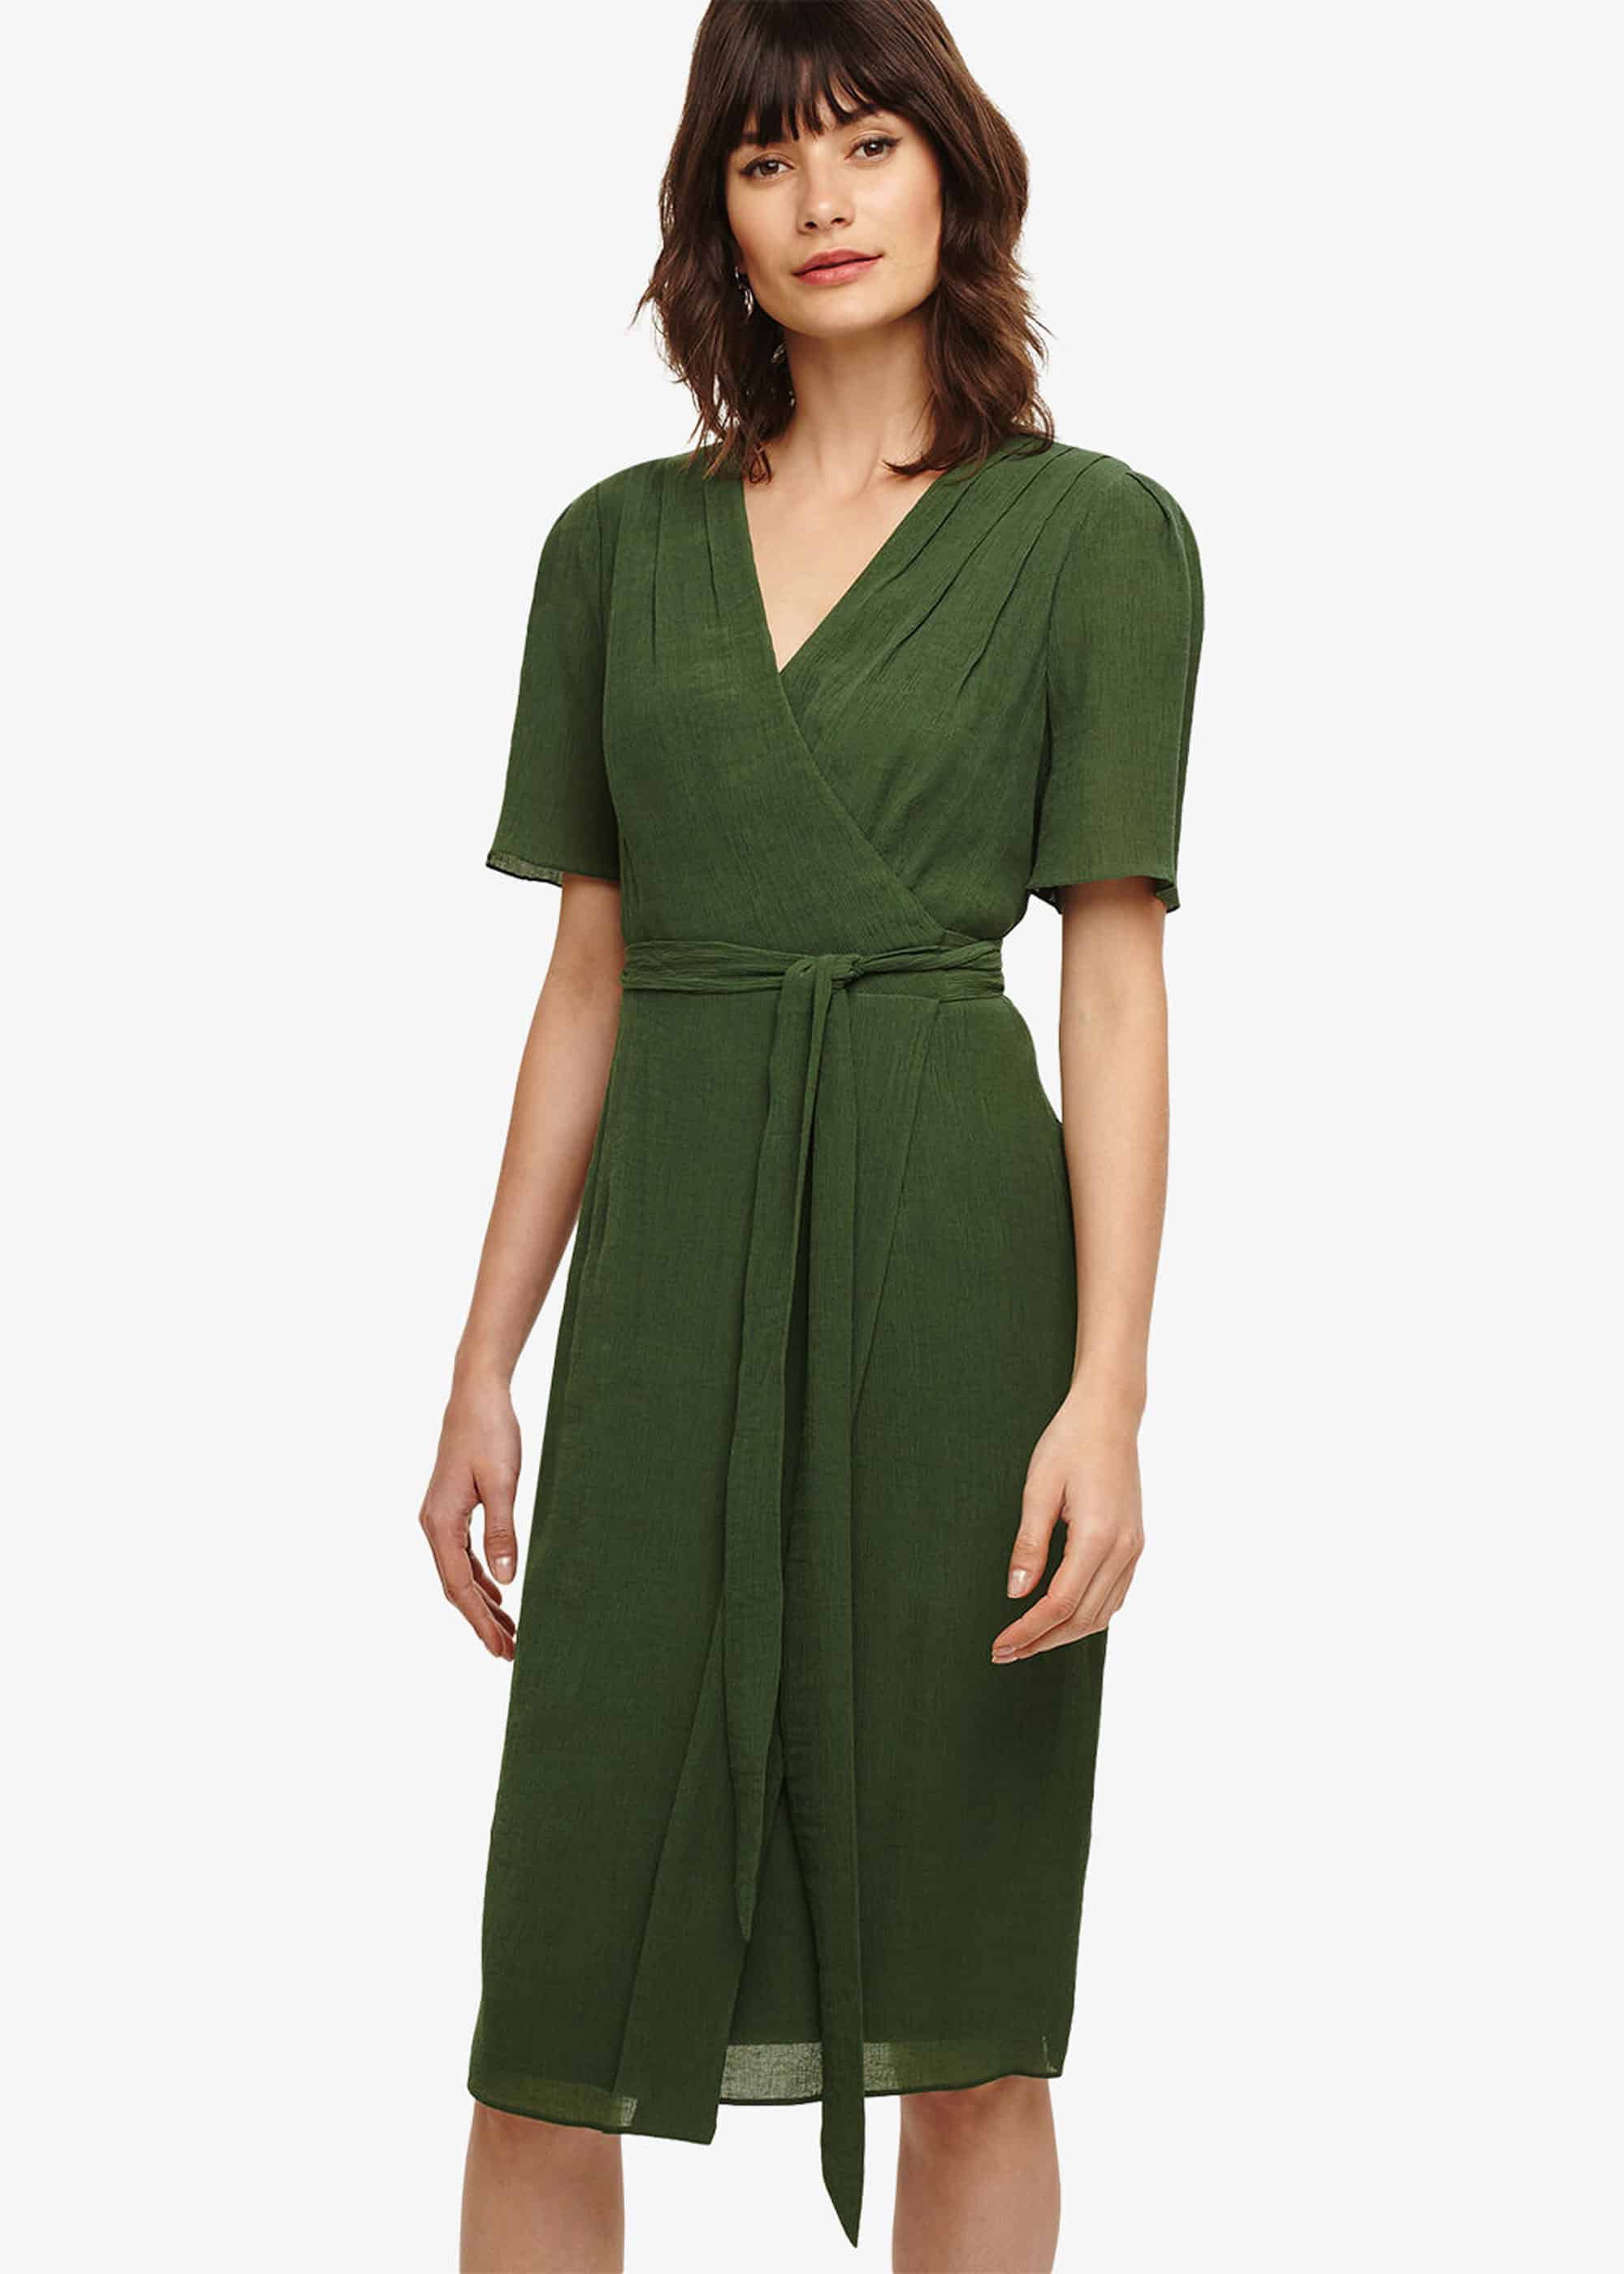 Phase Eight Green Wrap Dress Factory ...